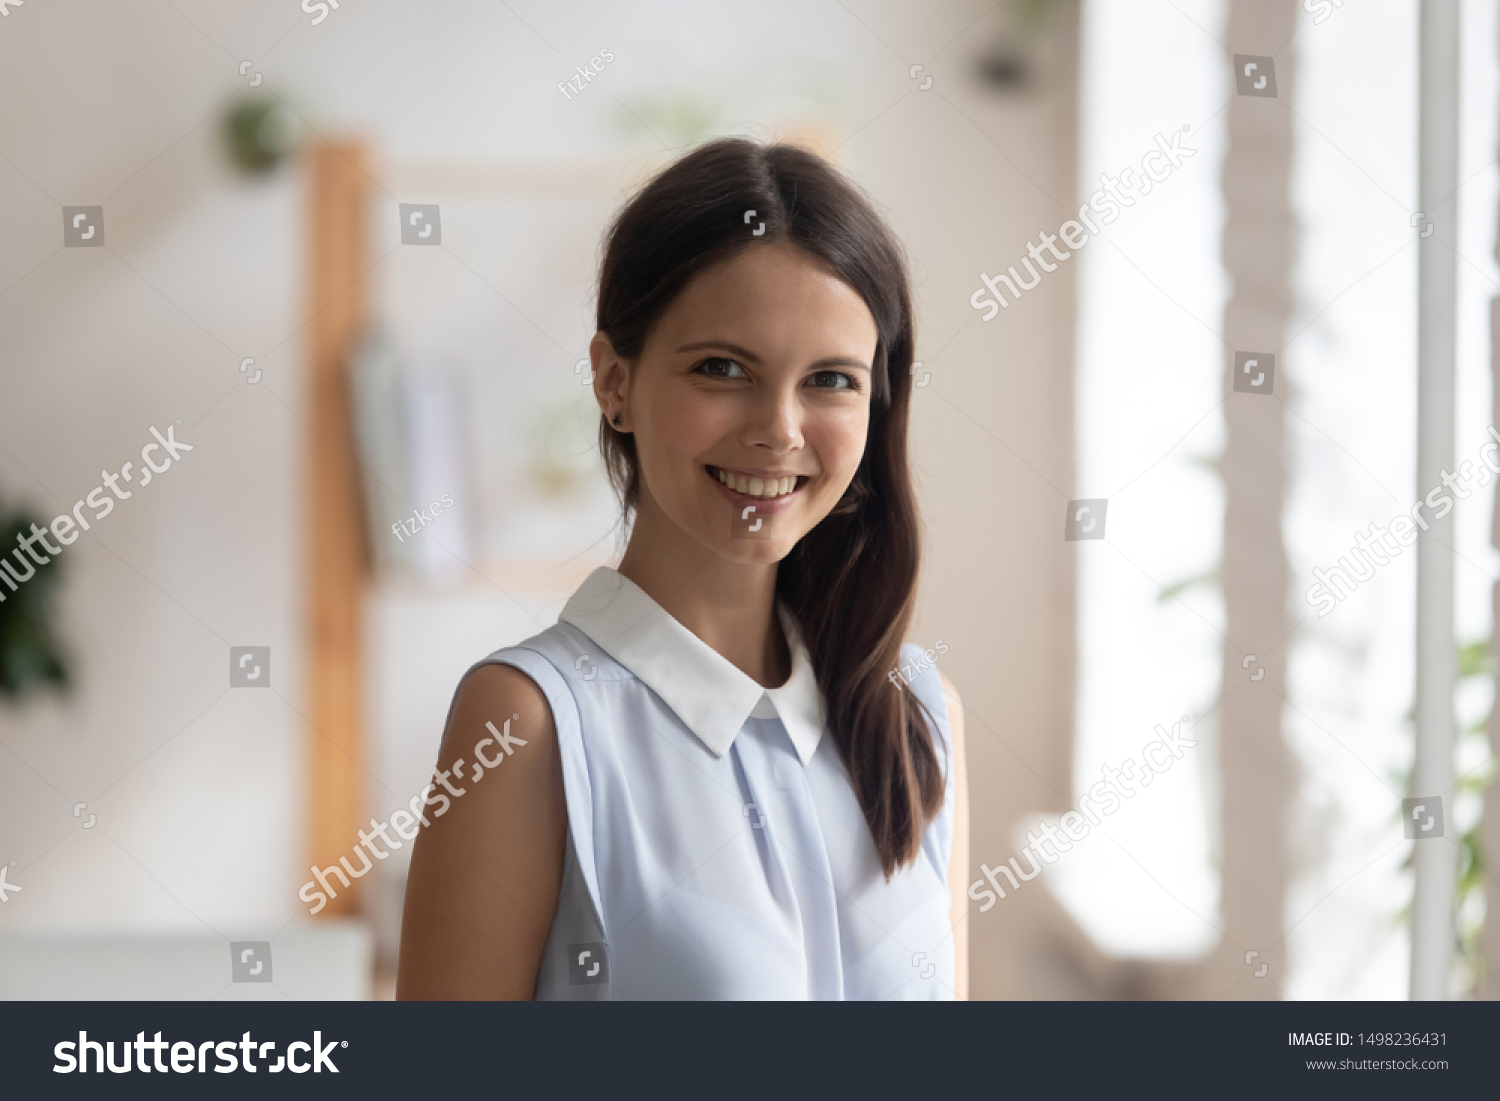 Headshot profile picture of confident young woman bank specialist or coach stand looking smiling at camera, happy positive millennial female employee or worker posing making photo, shooting for album #1498236431